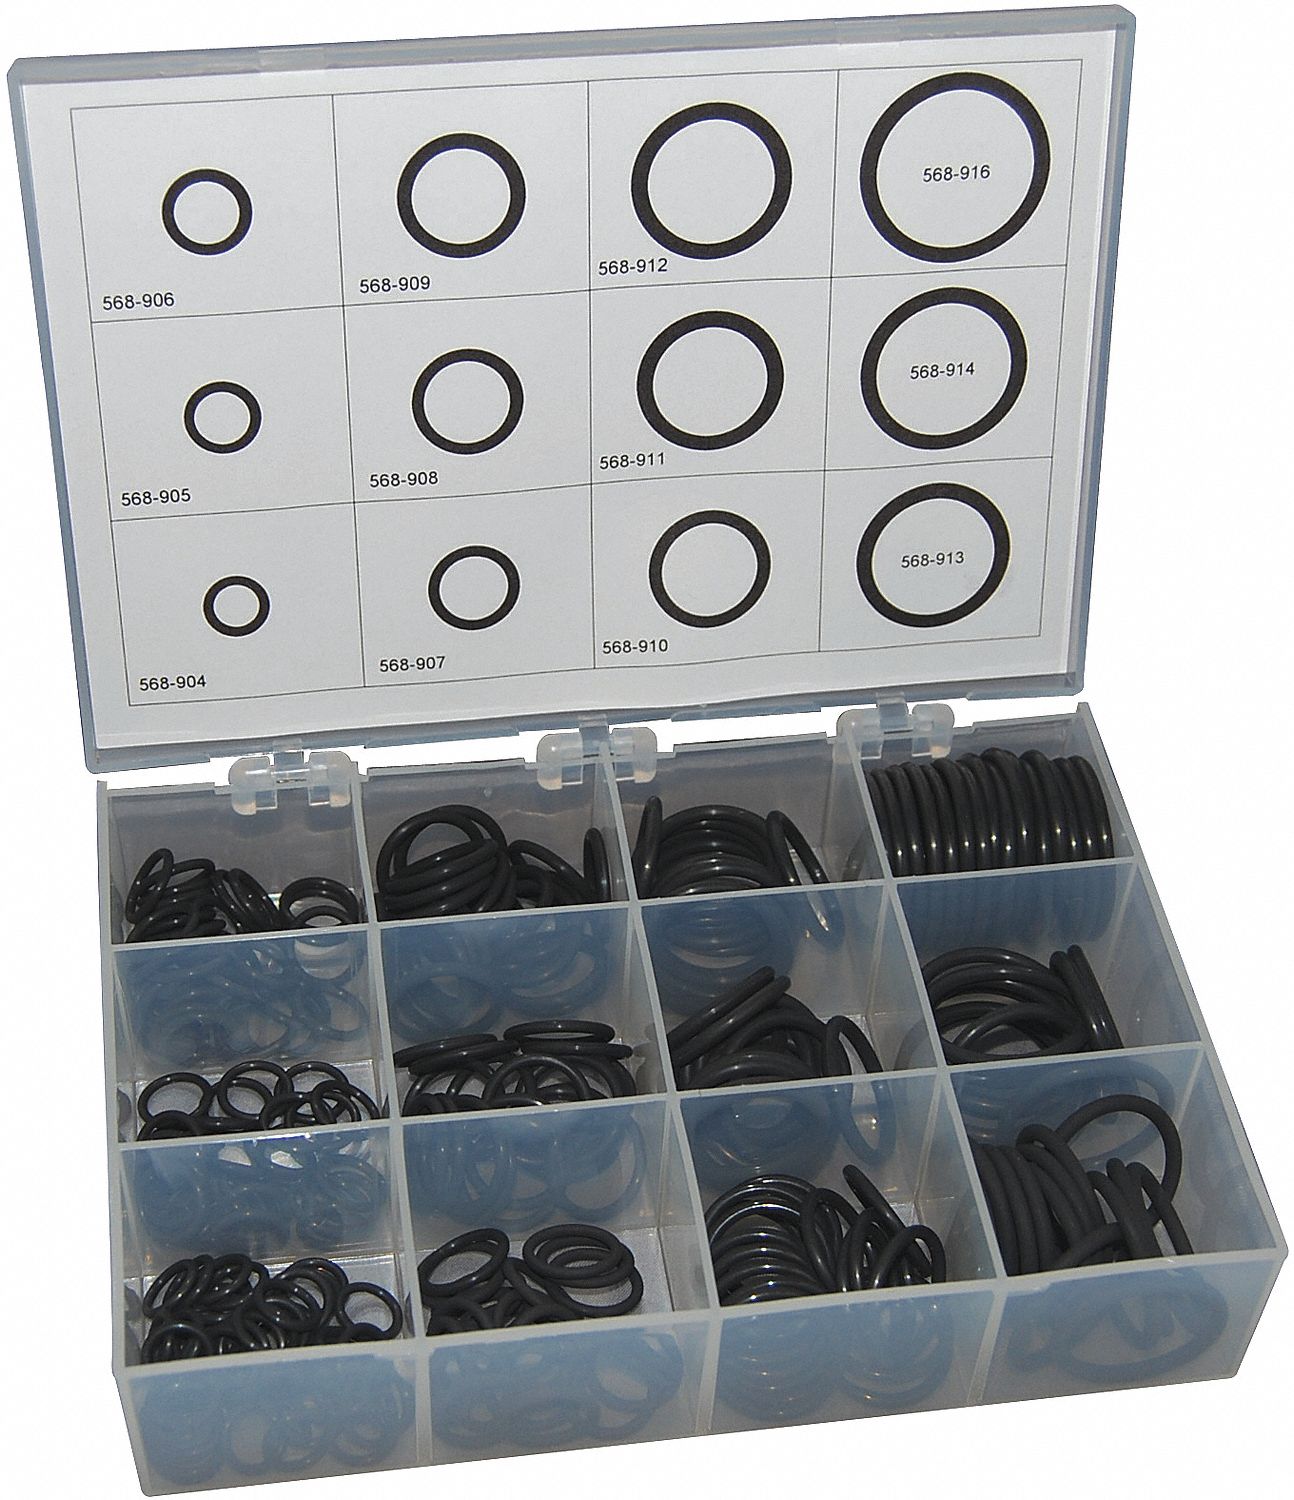 O-RING BOSS KIT, ASSORTMENT, 90 DUROMETER, 12 DIFFERENT SIZES, BUNA N RUBBER, PC 212